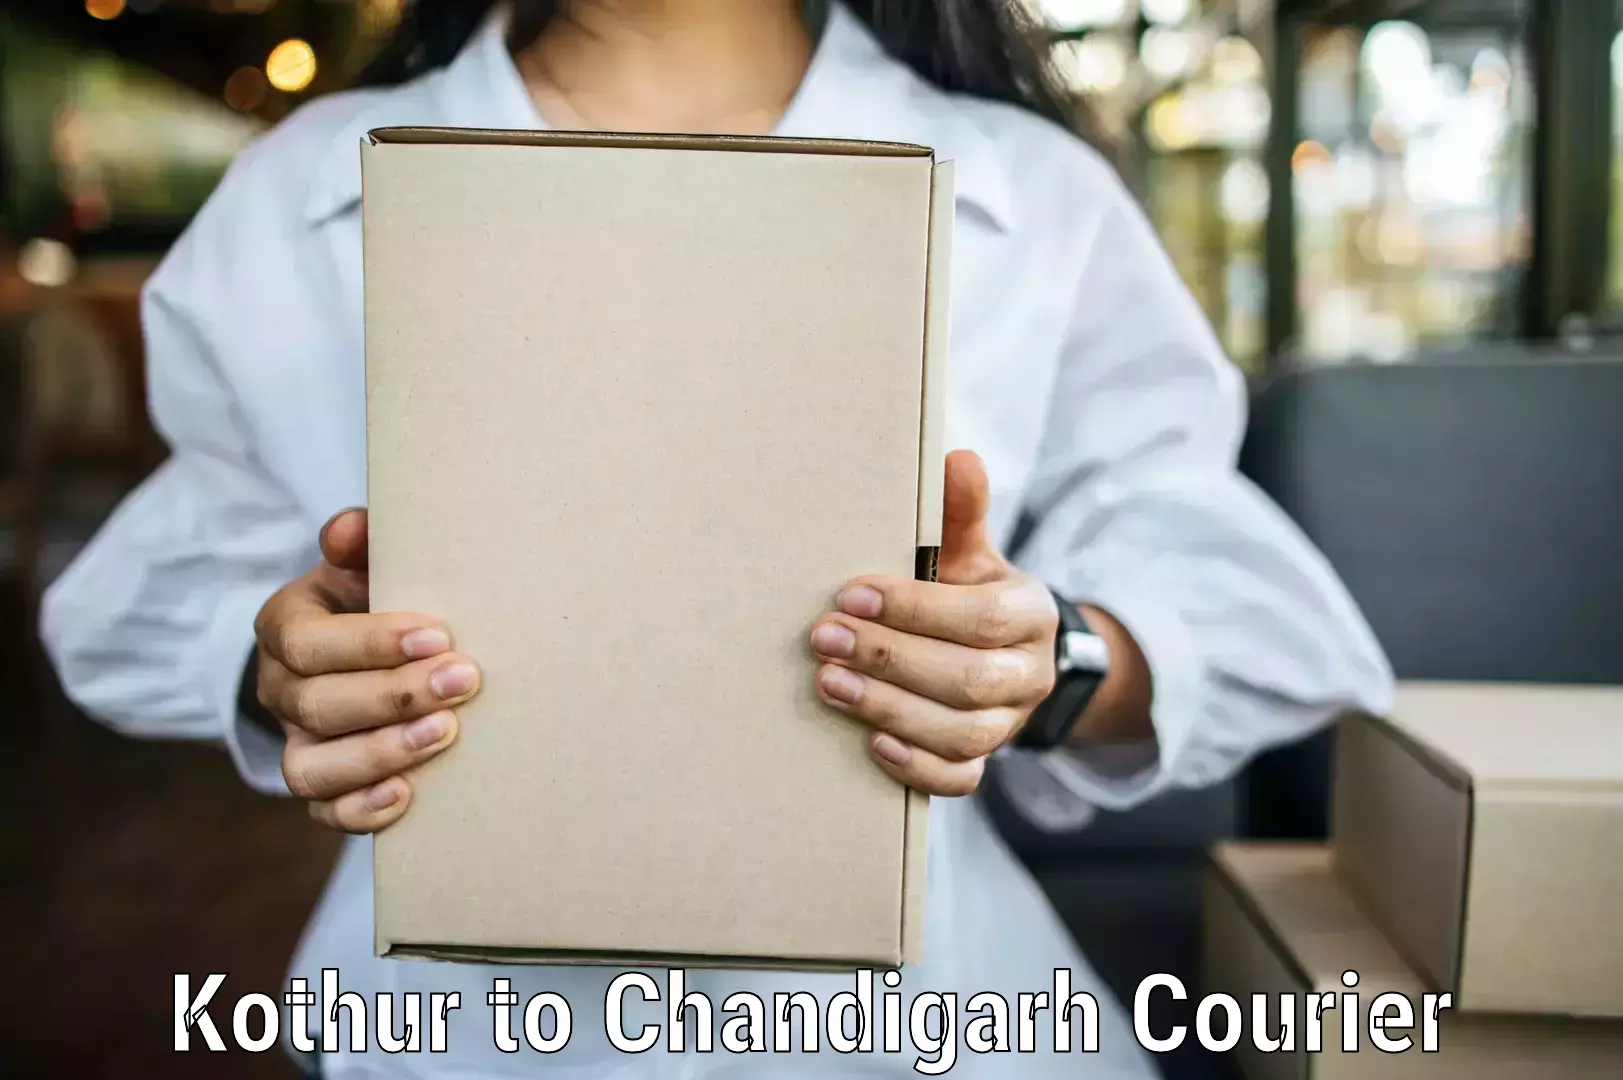 Reliable courier service in Kothur to Chandigarh